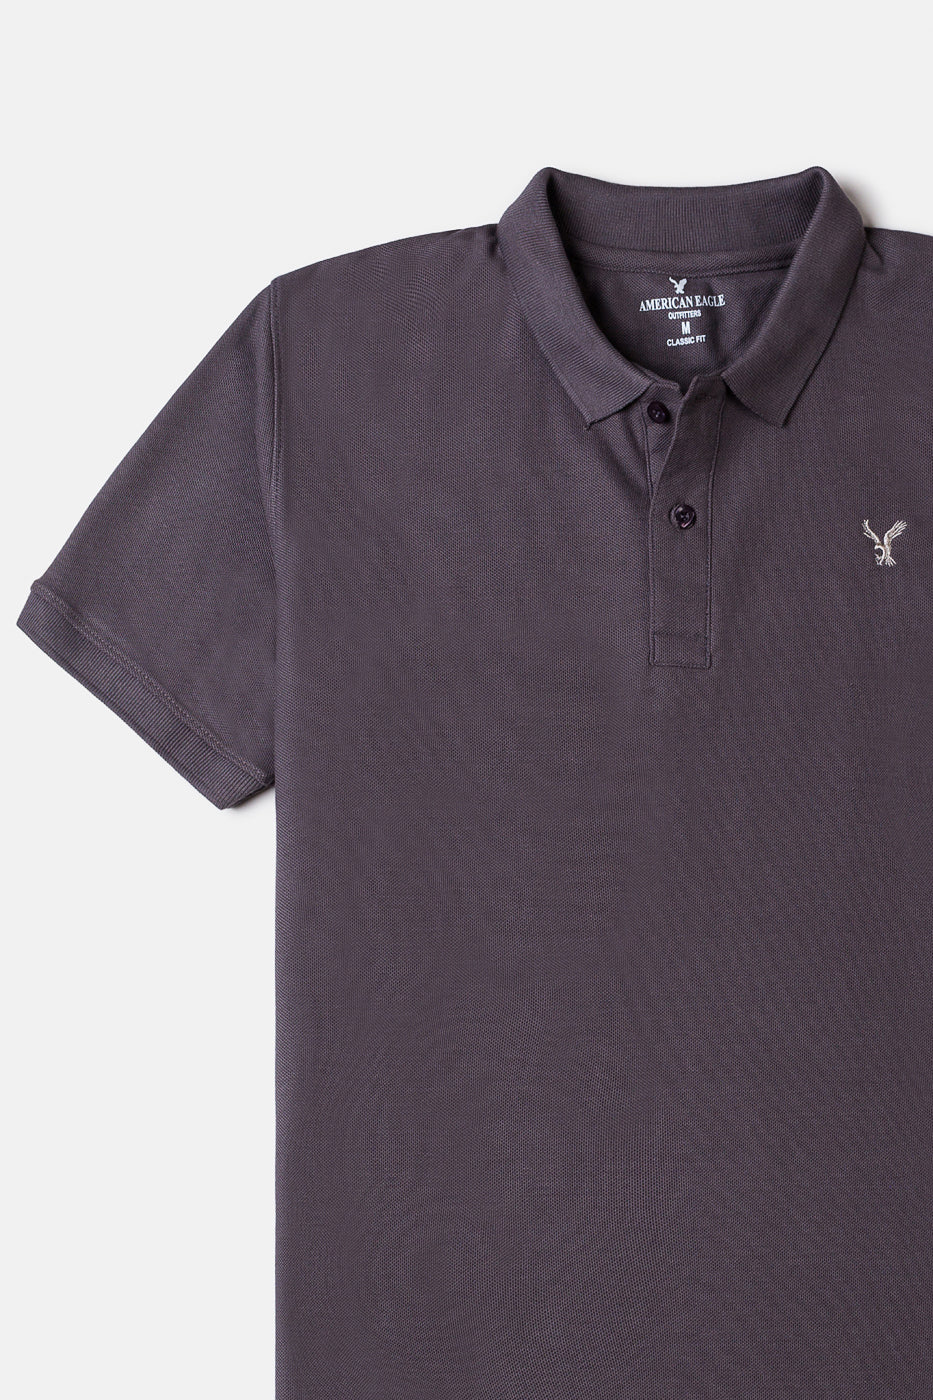 AE Imported Pique Polo shirt – Heather Grey